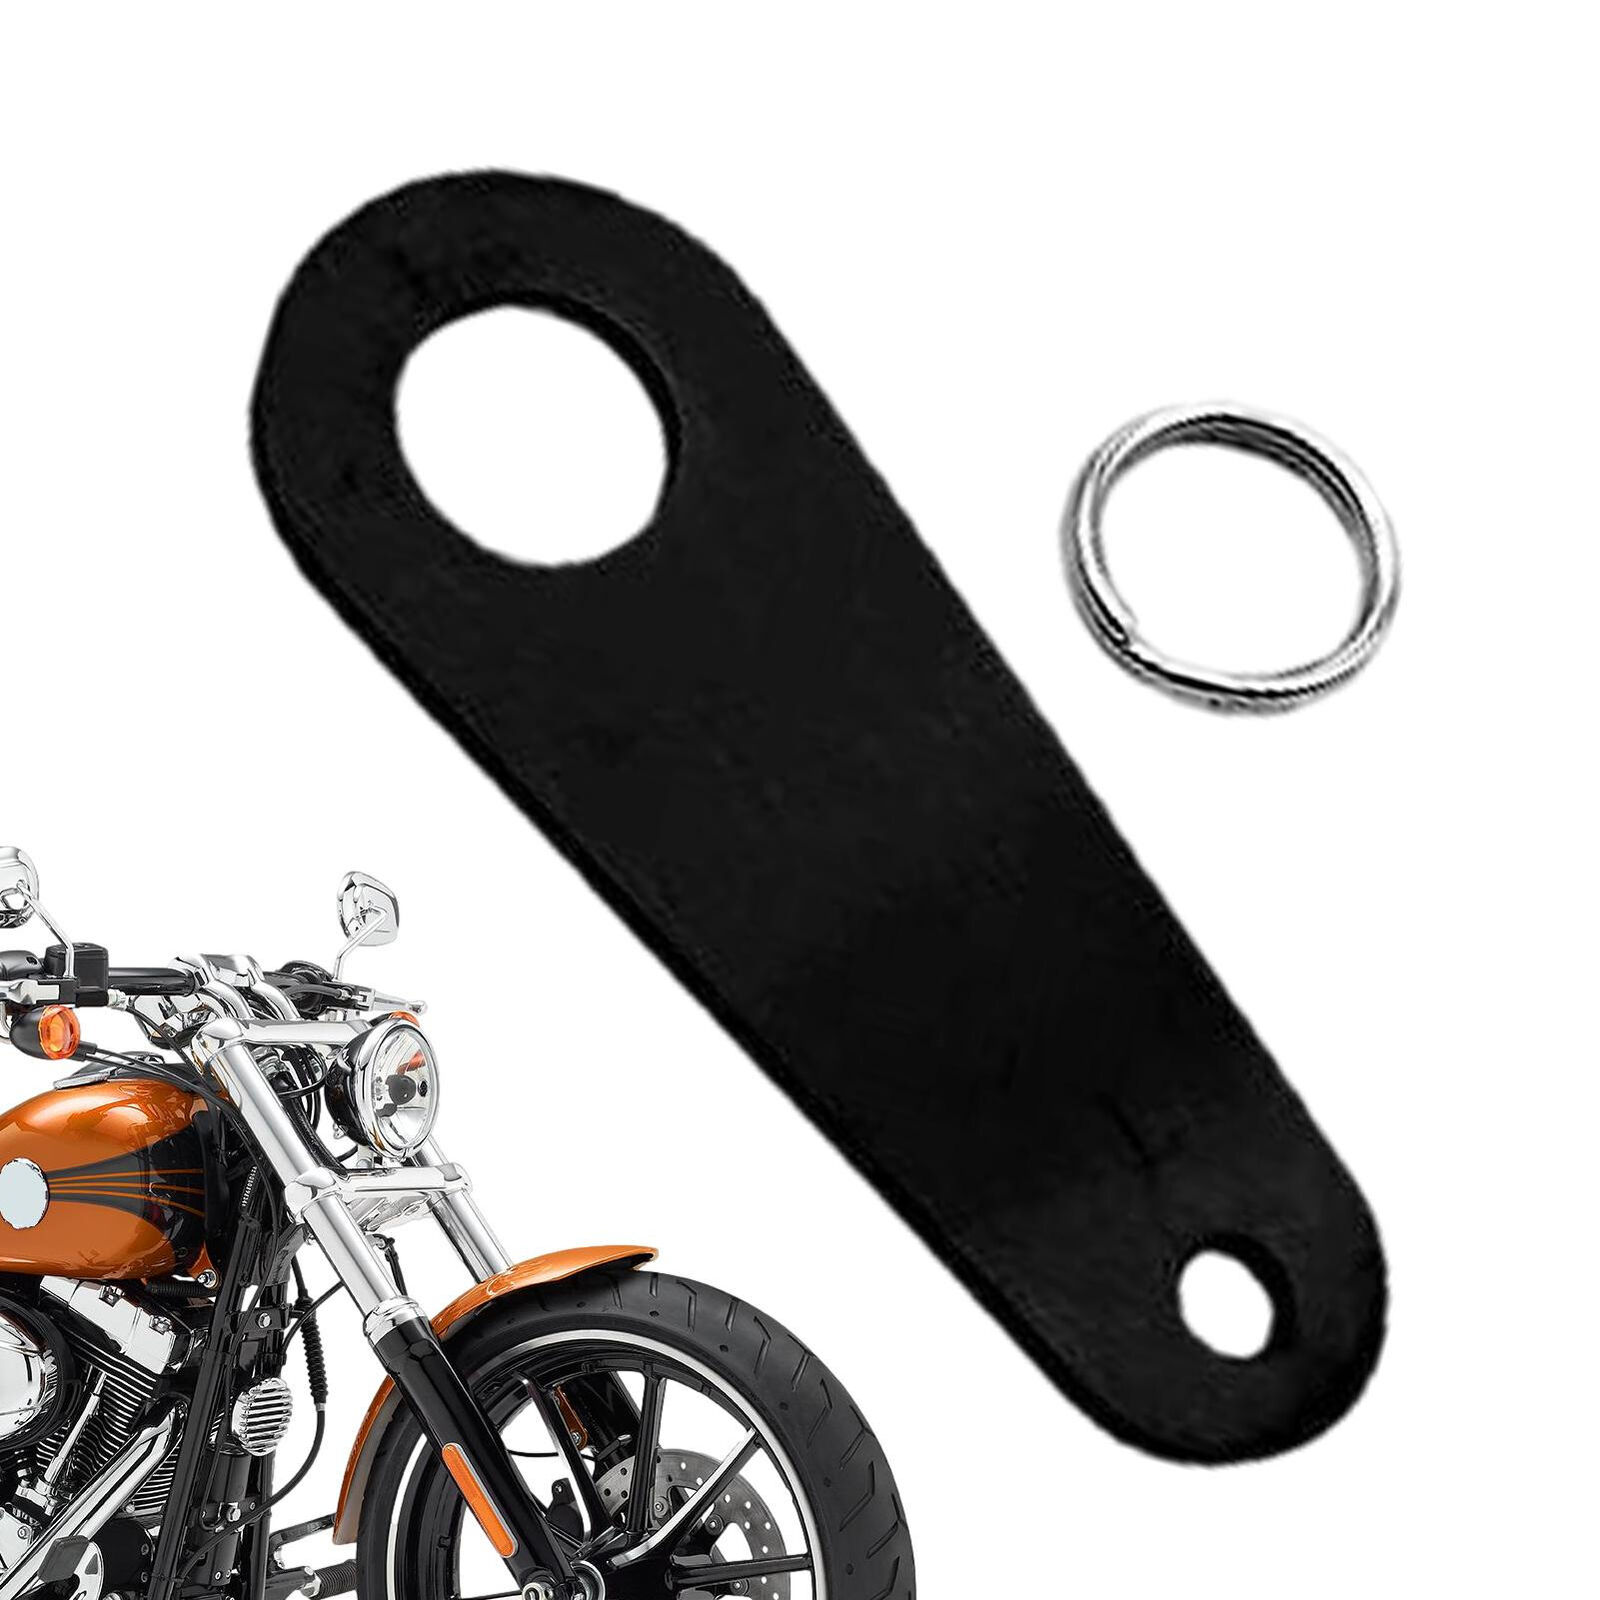 Motorcycle Bell Hanger Mount Motorcycle Bell Hanger Key Fob Fits For Any Bells